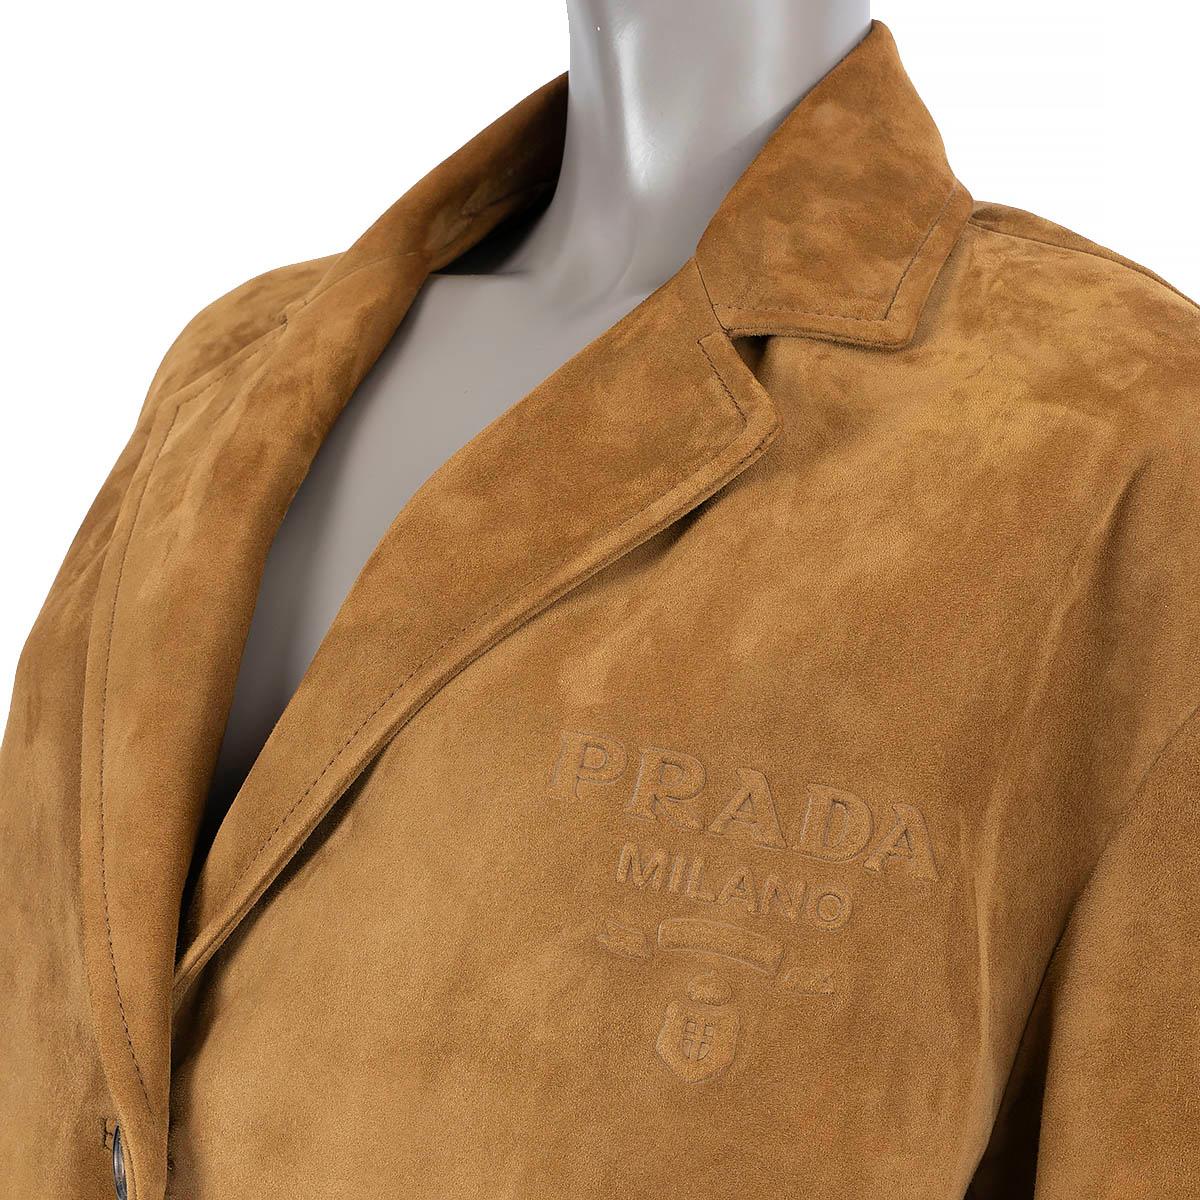 PRADA camel brown suede 2022 SINGLE-BREASTED OVERSIZED Jacket 38 XS 2